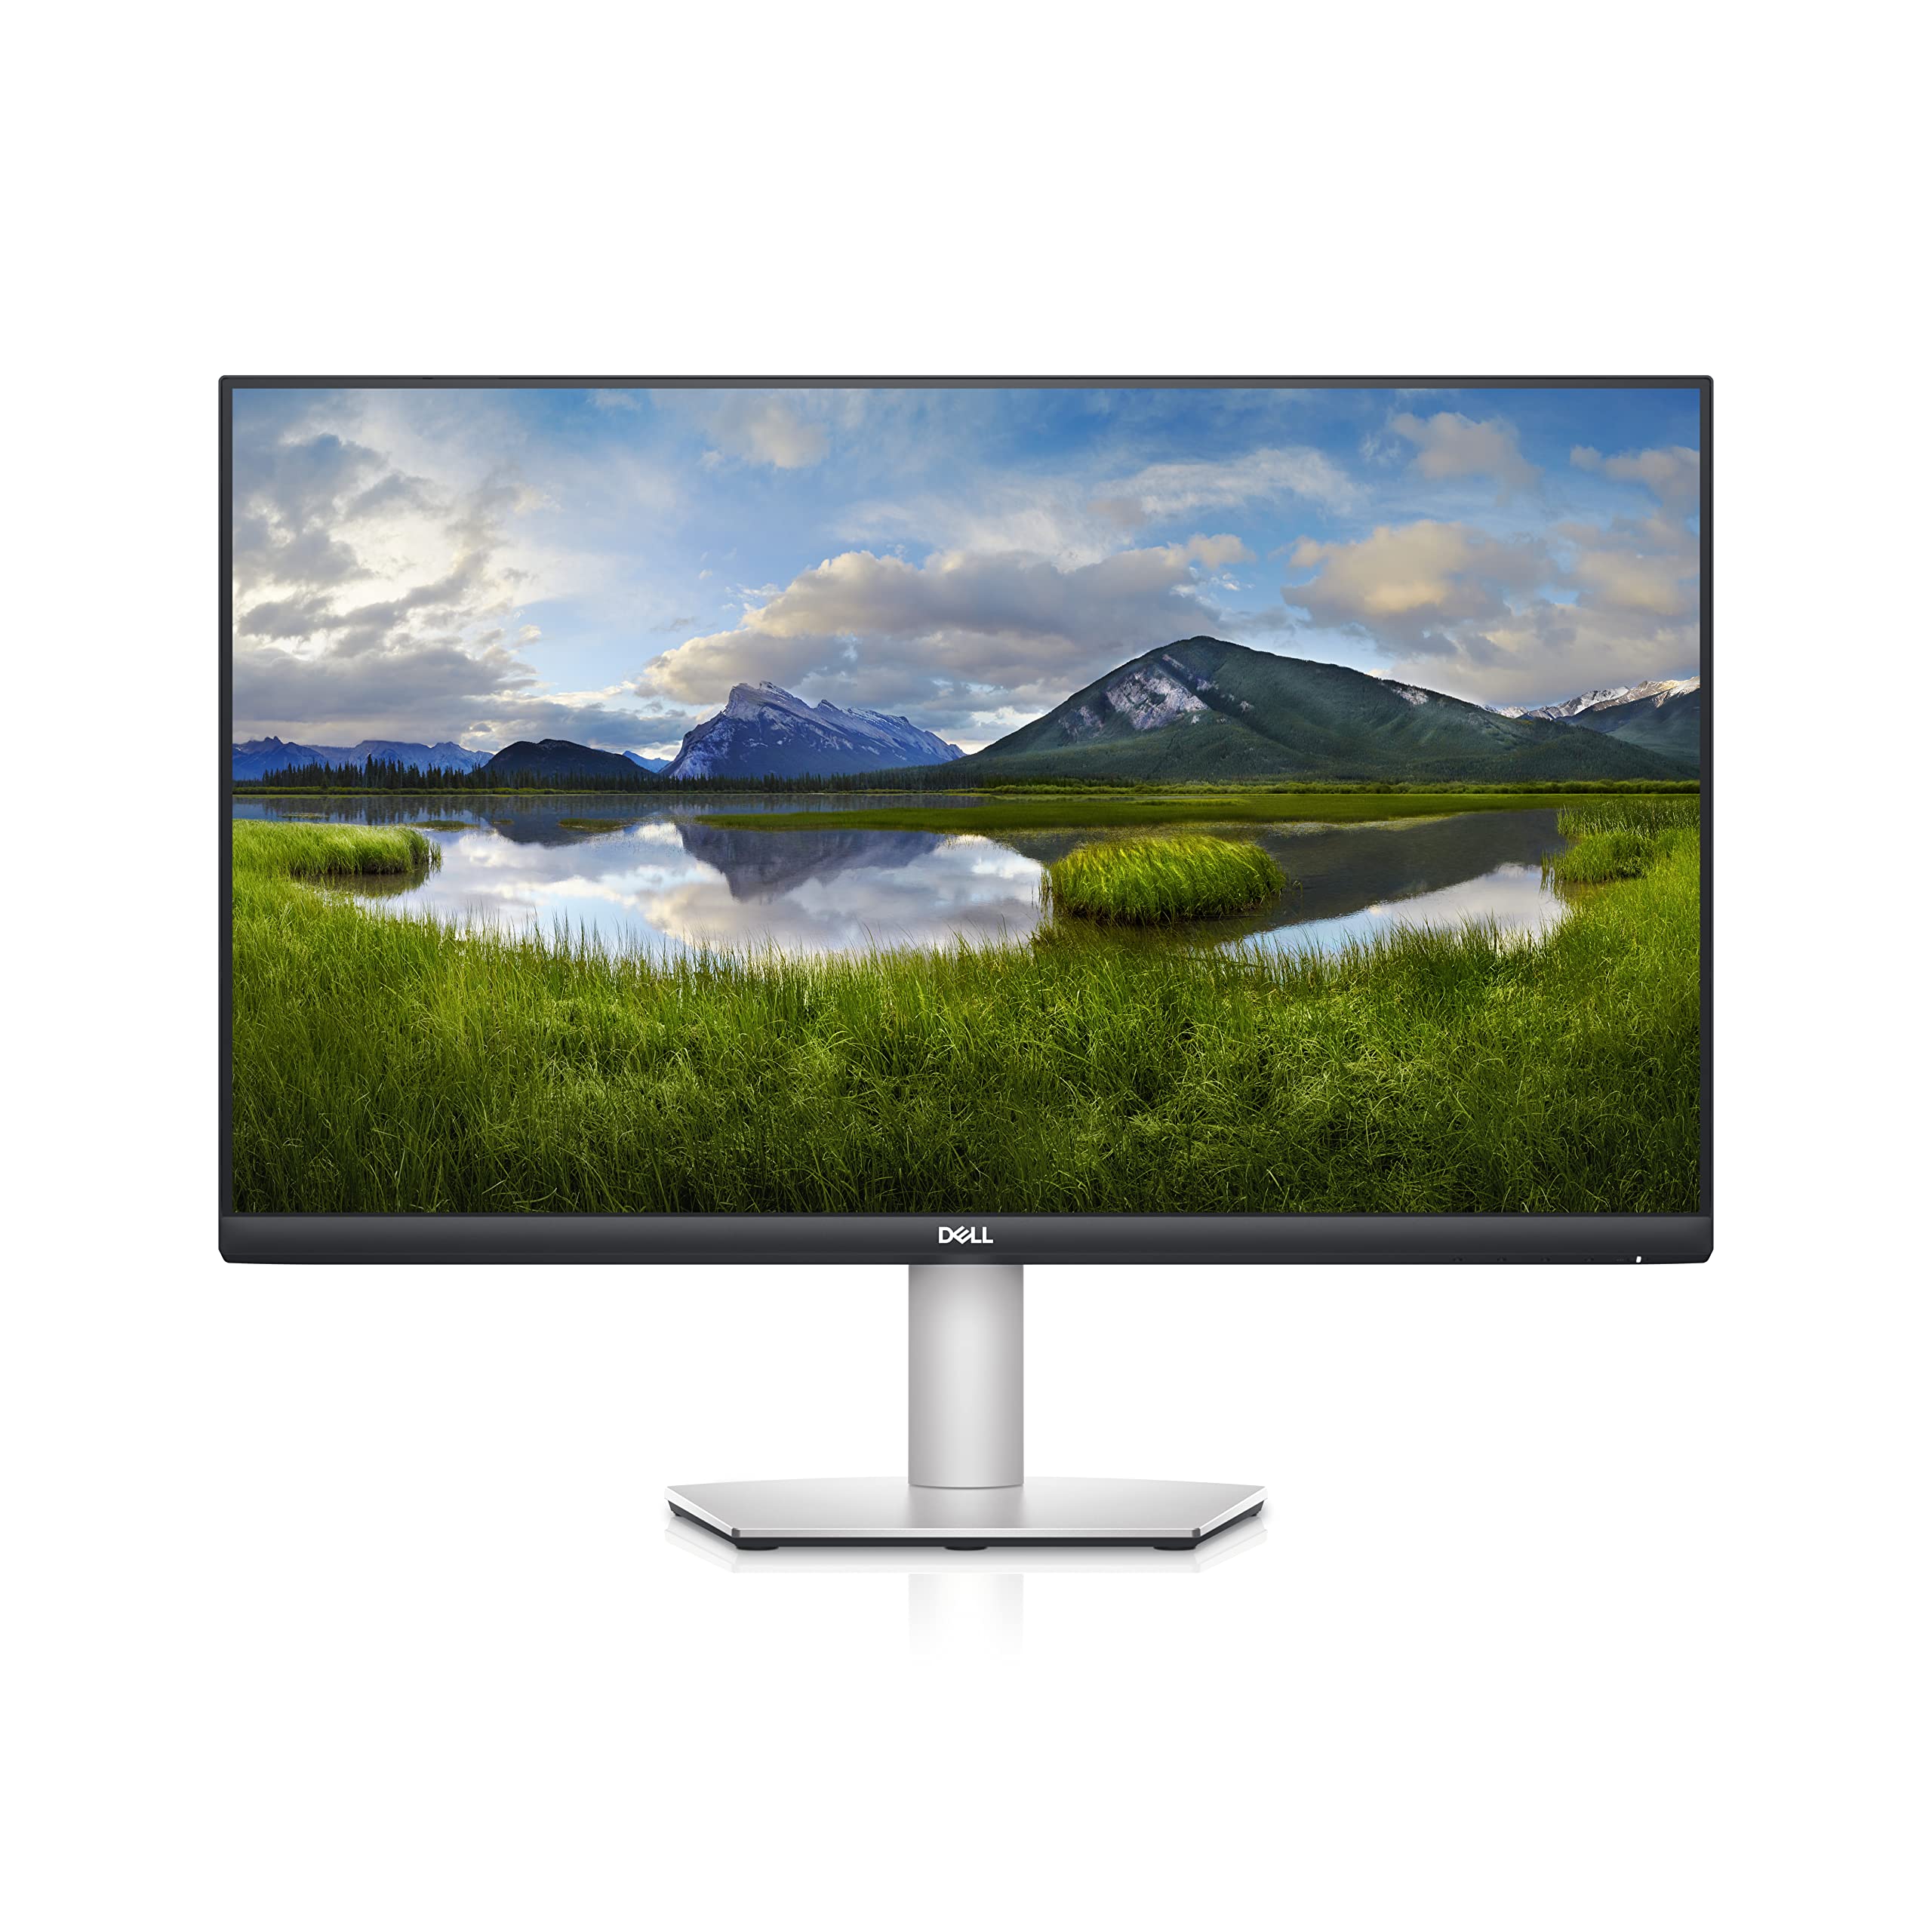 Dell USB-C Monitor - Full HD Display, 75Hz Refresh Rate, 4MS Grey-to-Grey Response Time (Extreme Mode), Dual 3W Built-in Speakers, HDMI, IPS, AMD FreeSync